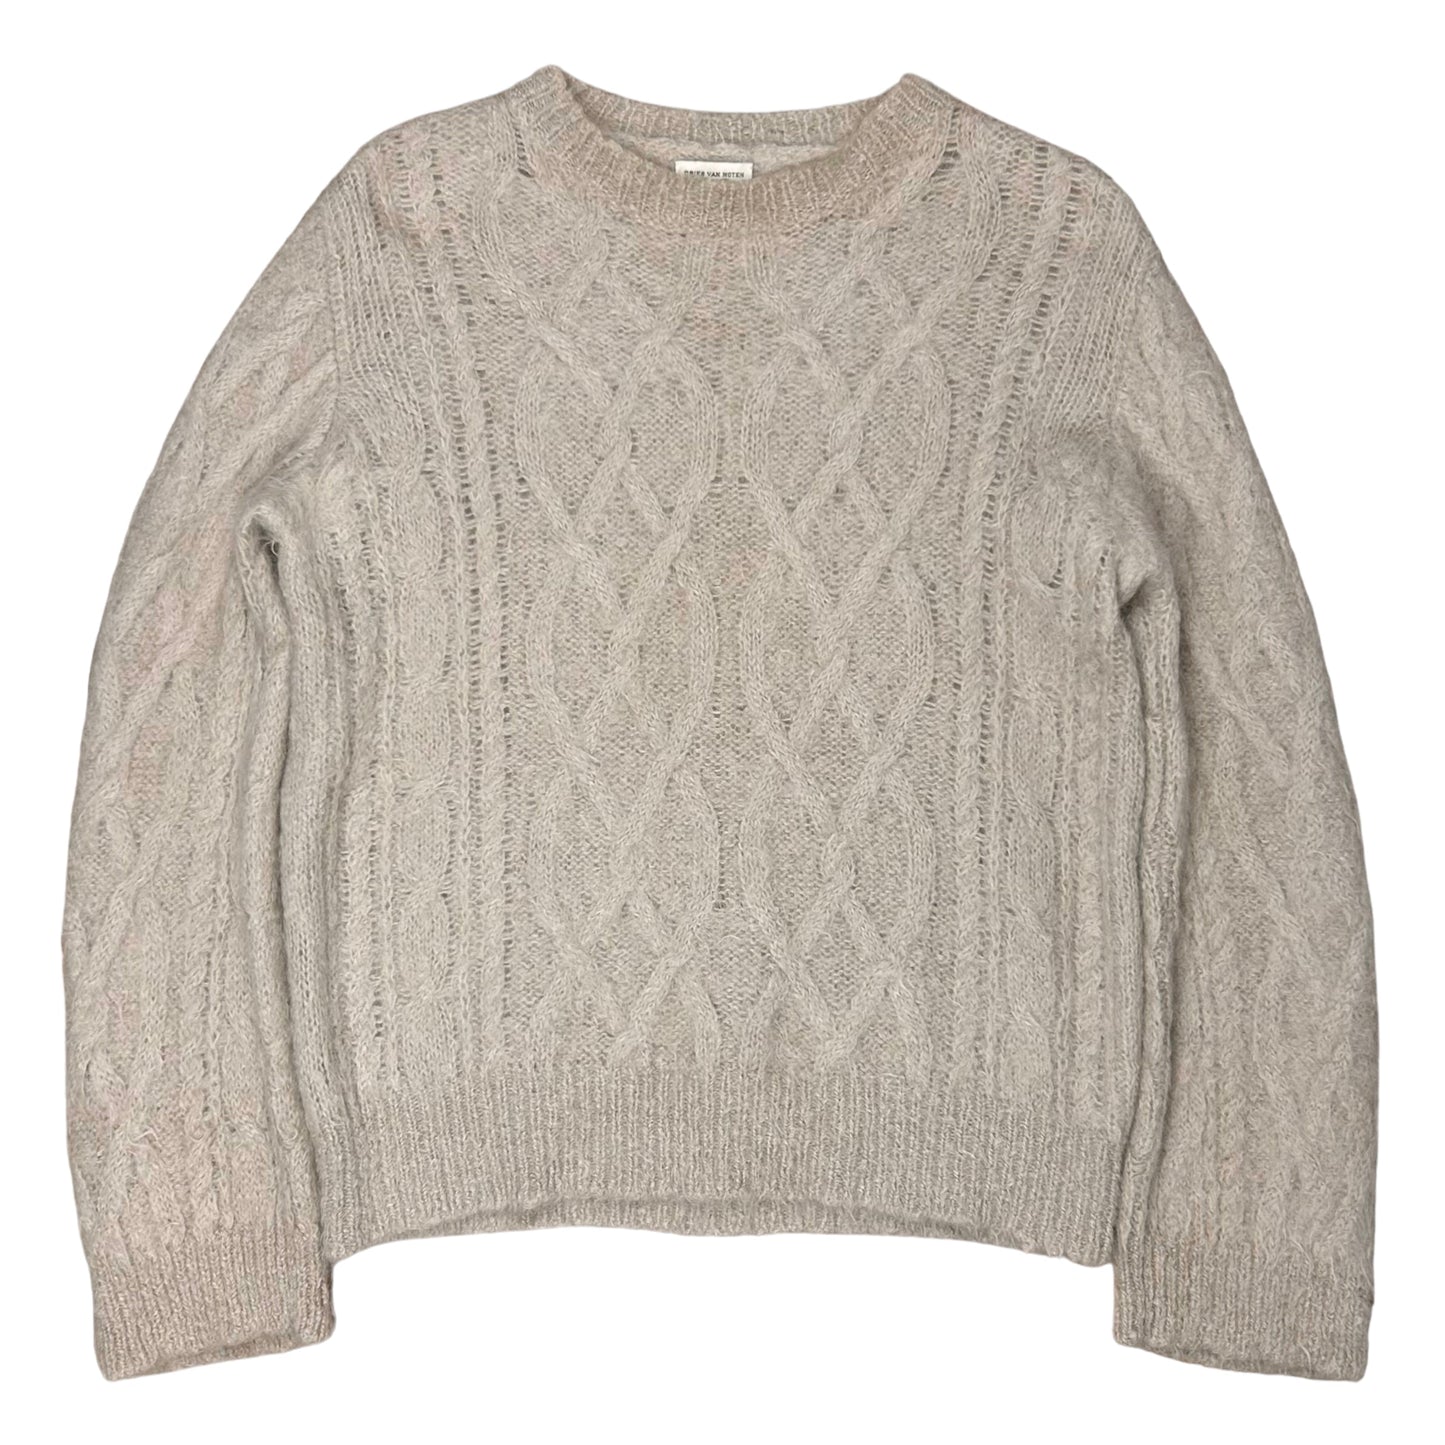 Dries Van Noten Cropped Alpaca Blend Cable Knit Sweater - AW17